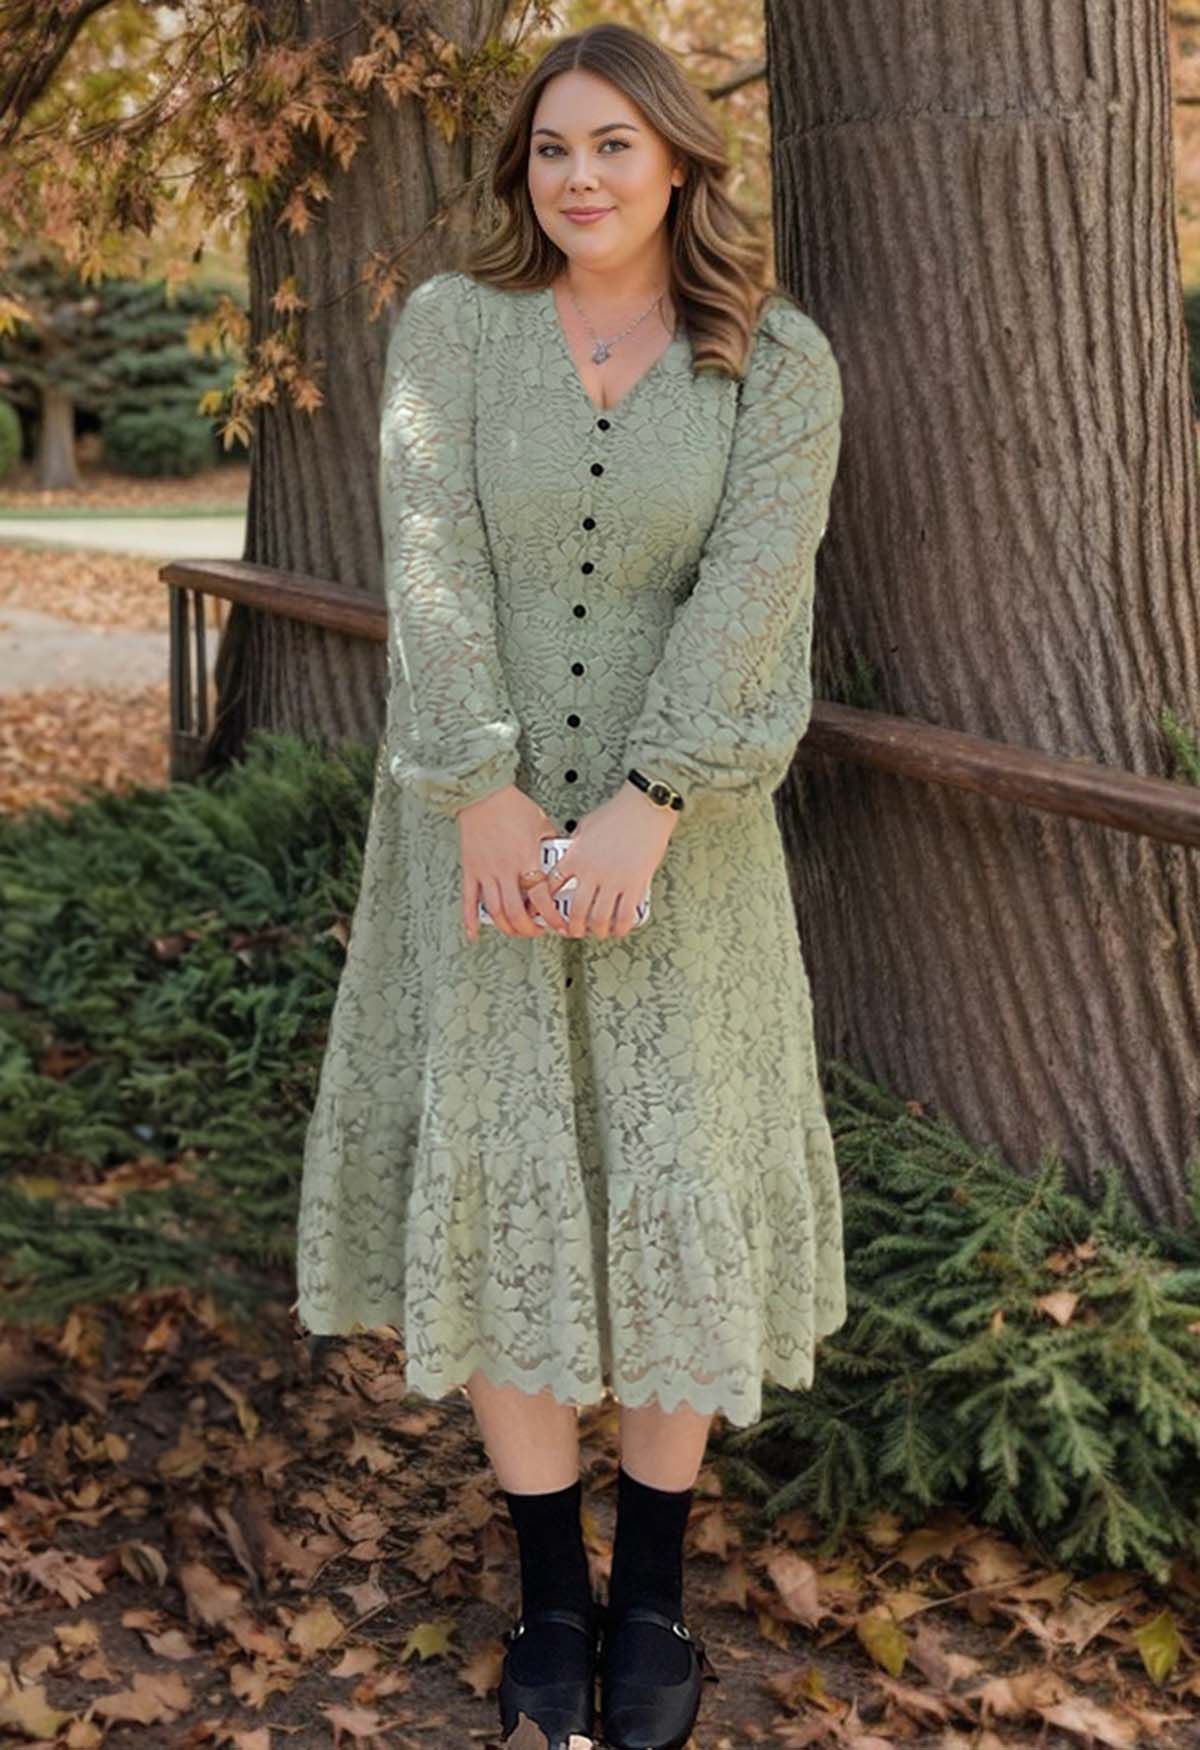 Button Down Full Floral Lace Frilling Dress in Pea Green